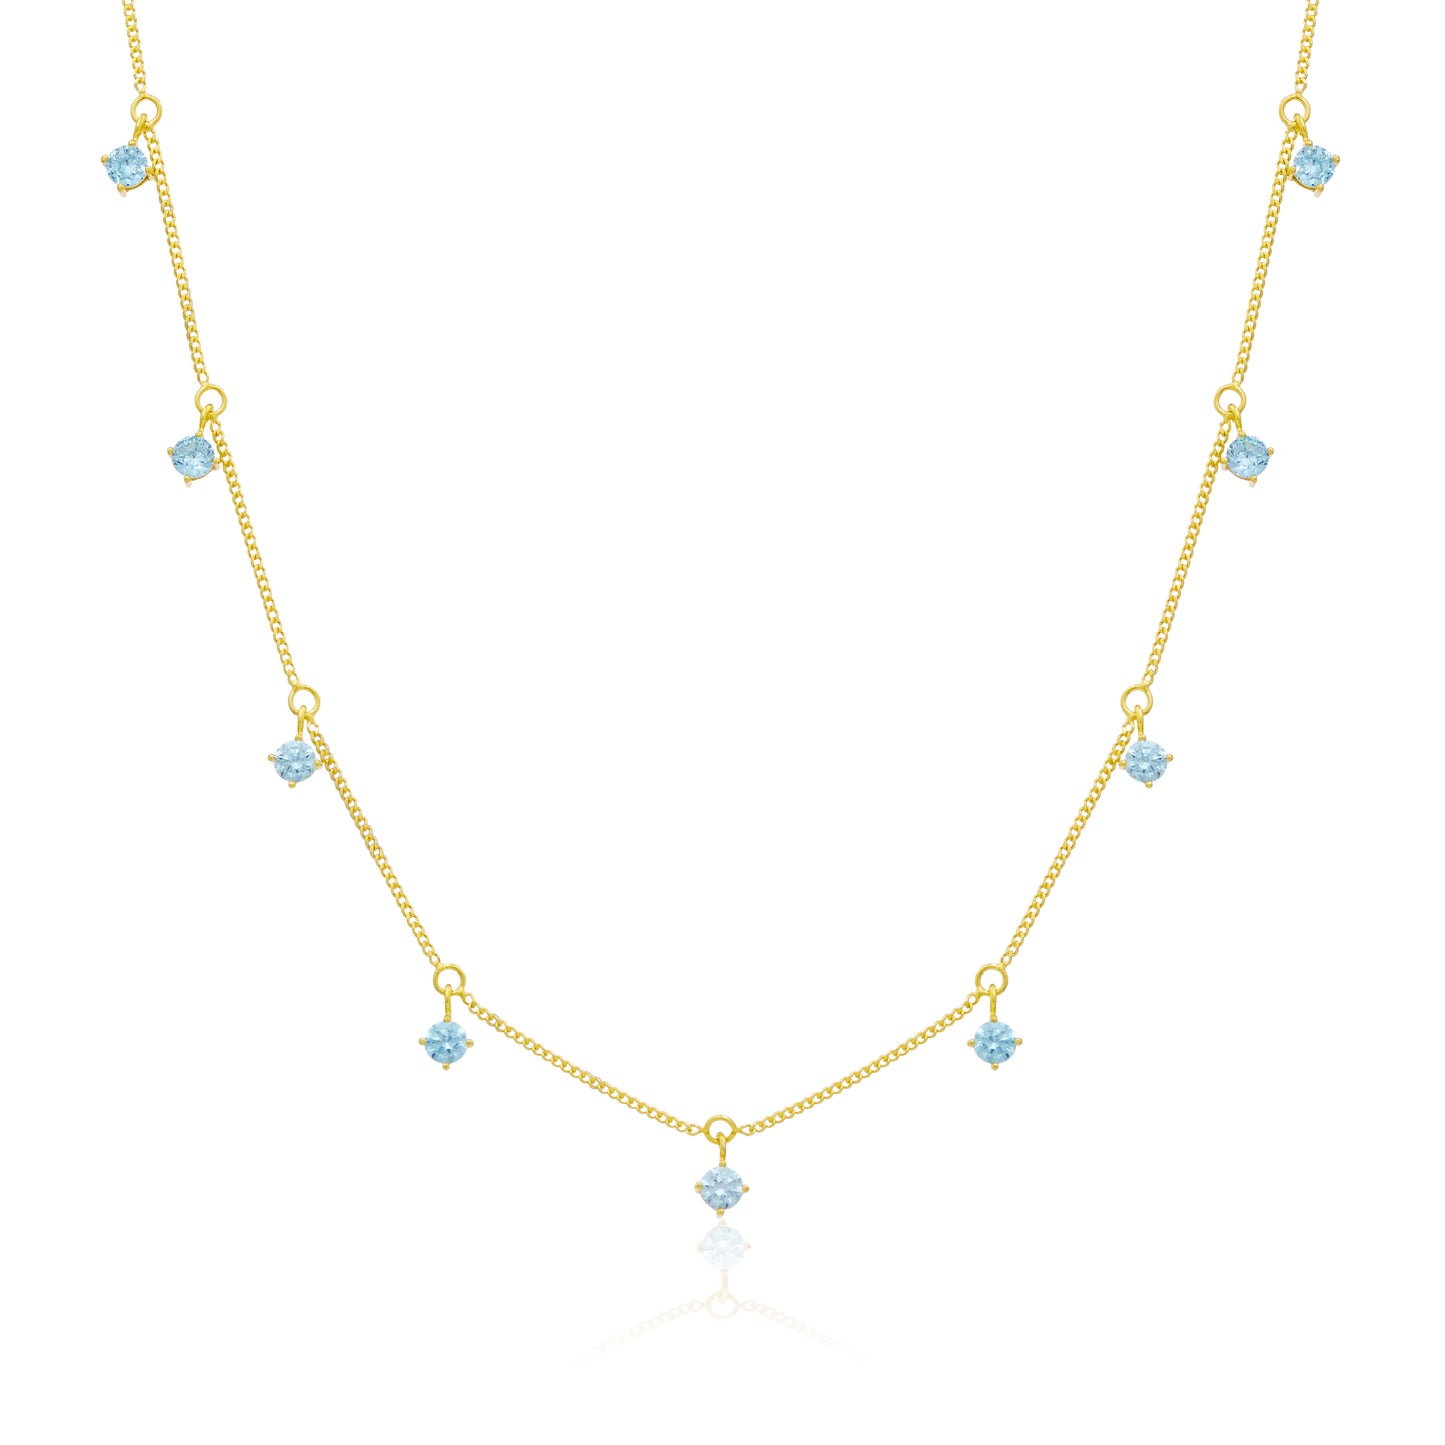 Gold Plated Sterling Silver Multi Aquamarine CZ Necklace 16+2 Inches